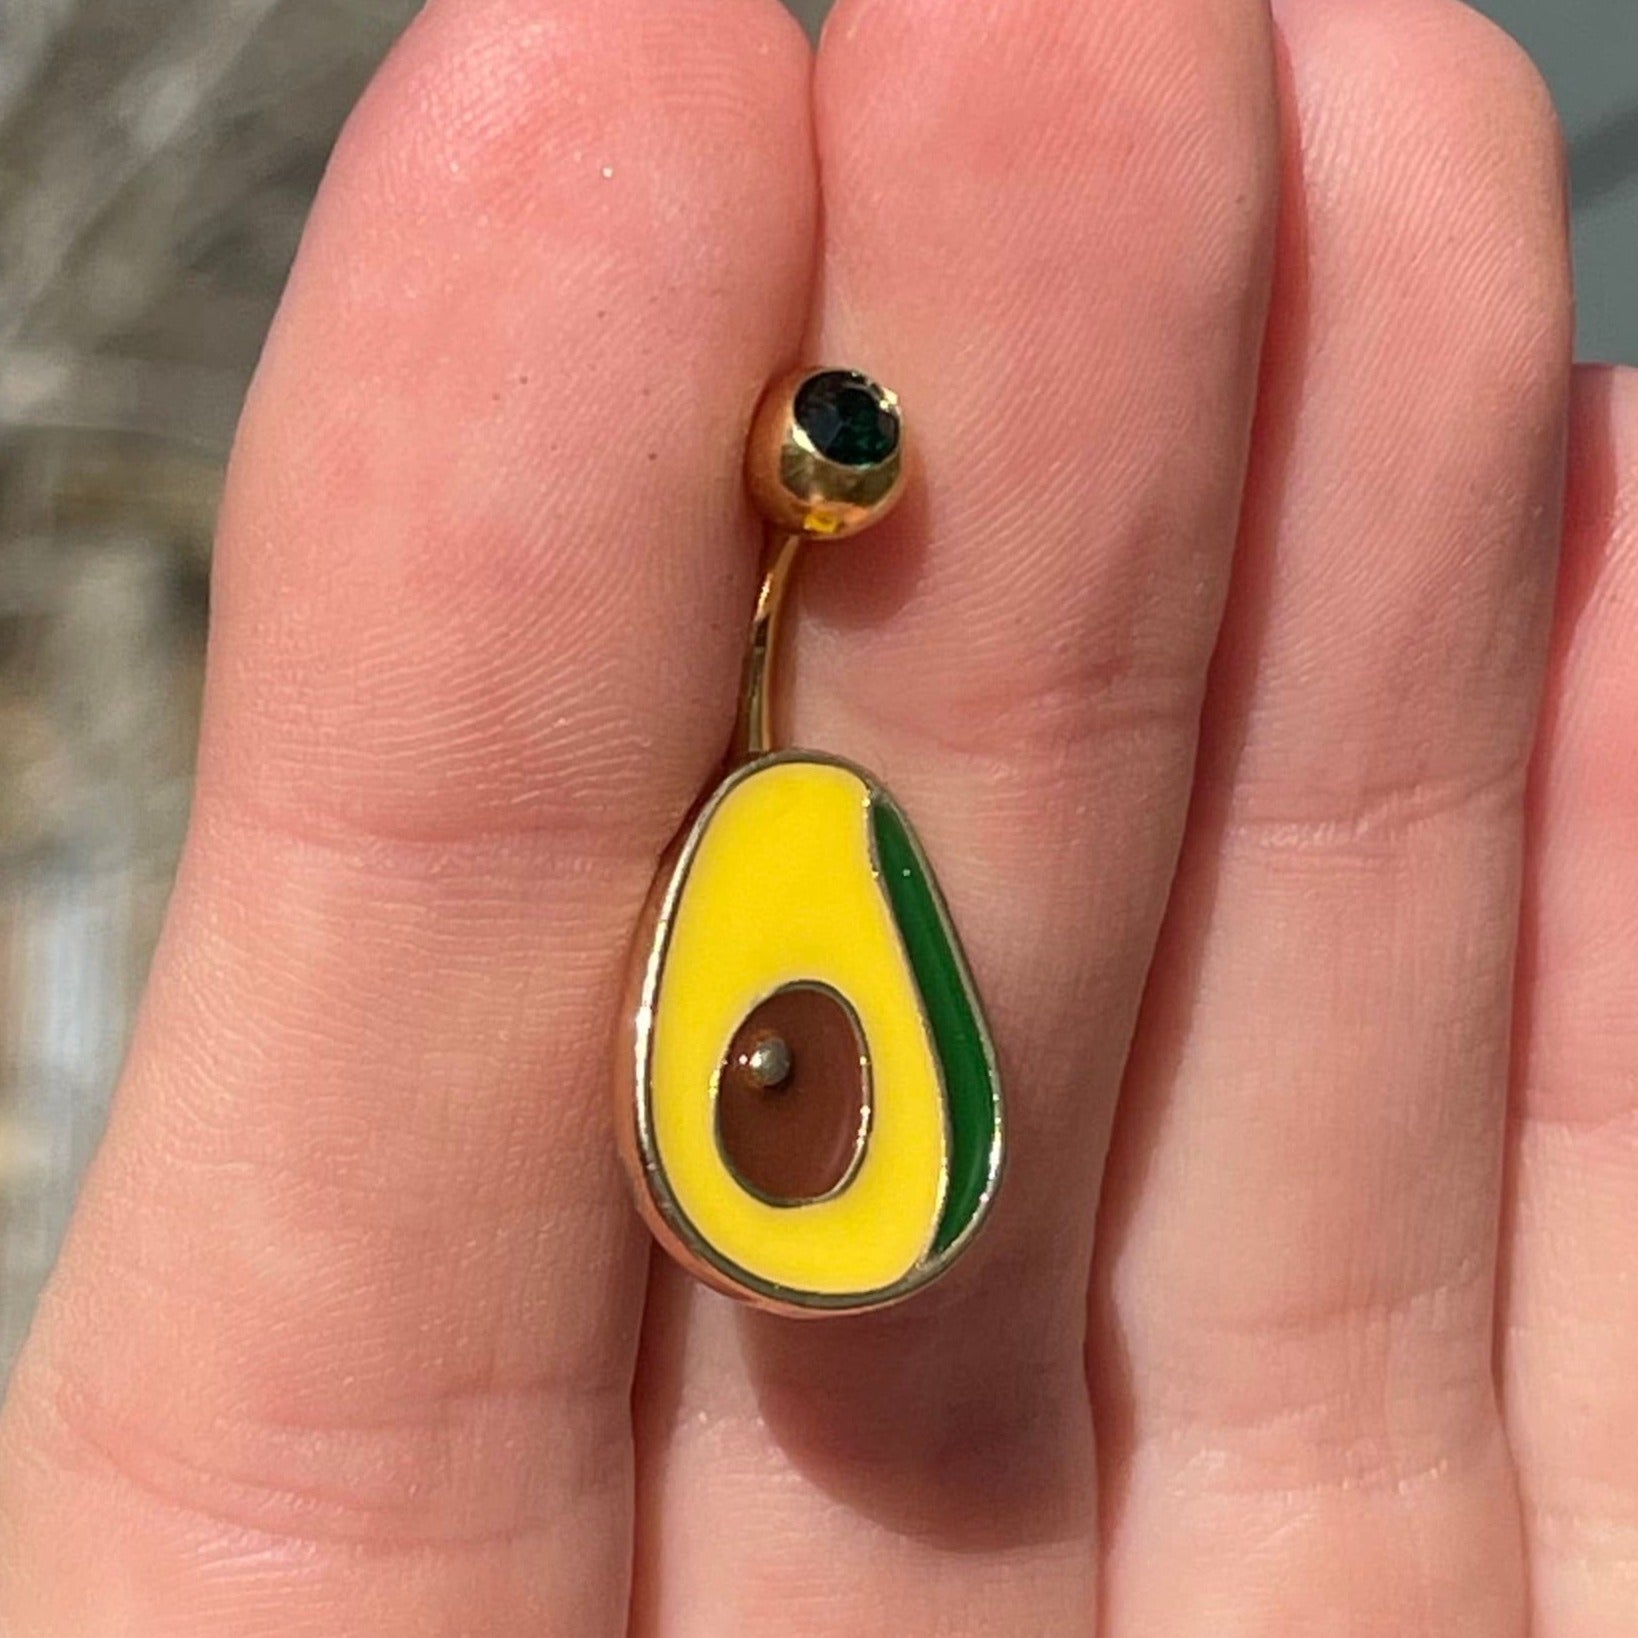 Cute Avocado Belly Button Ring (14G | 10mm | Surgical Steel)